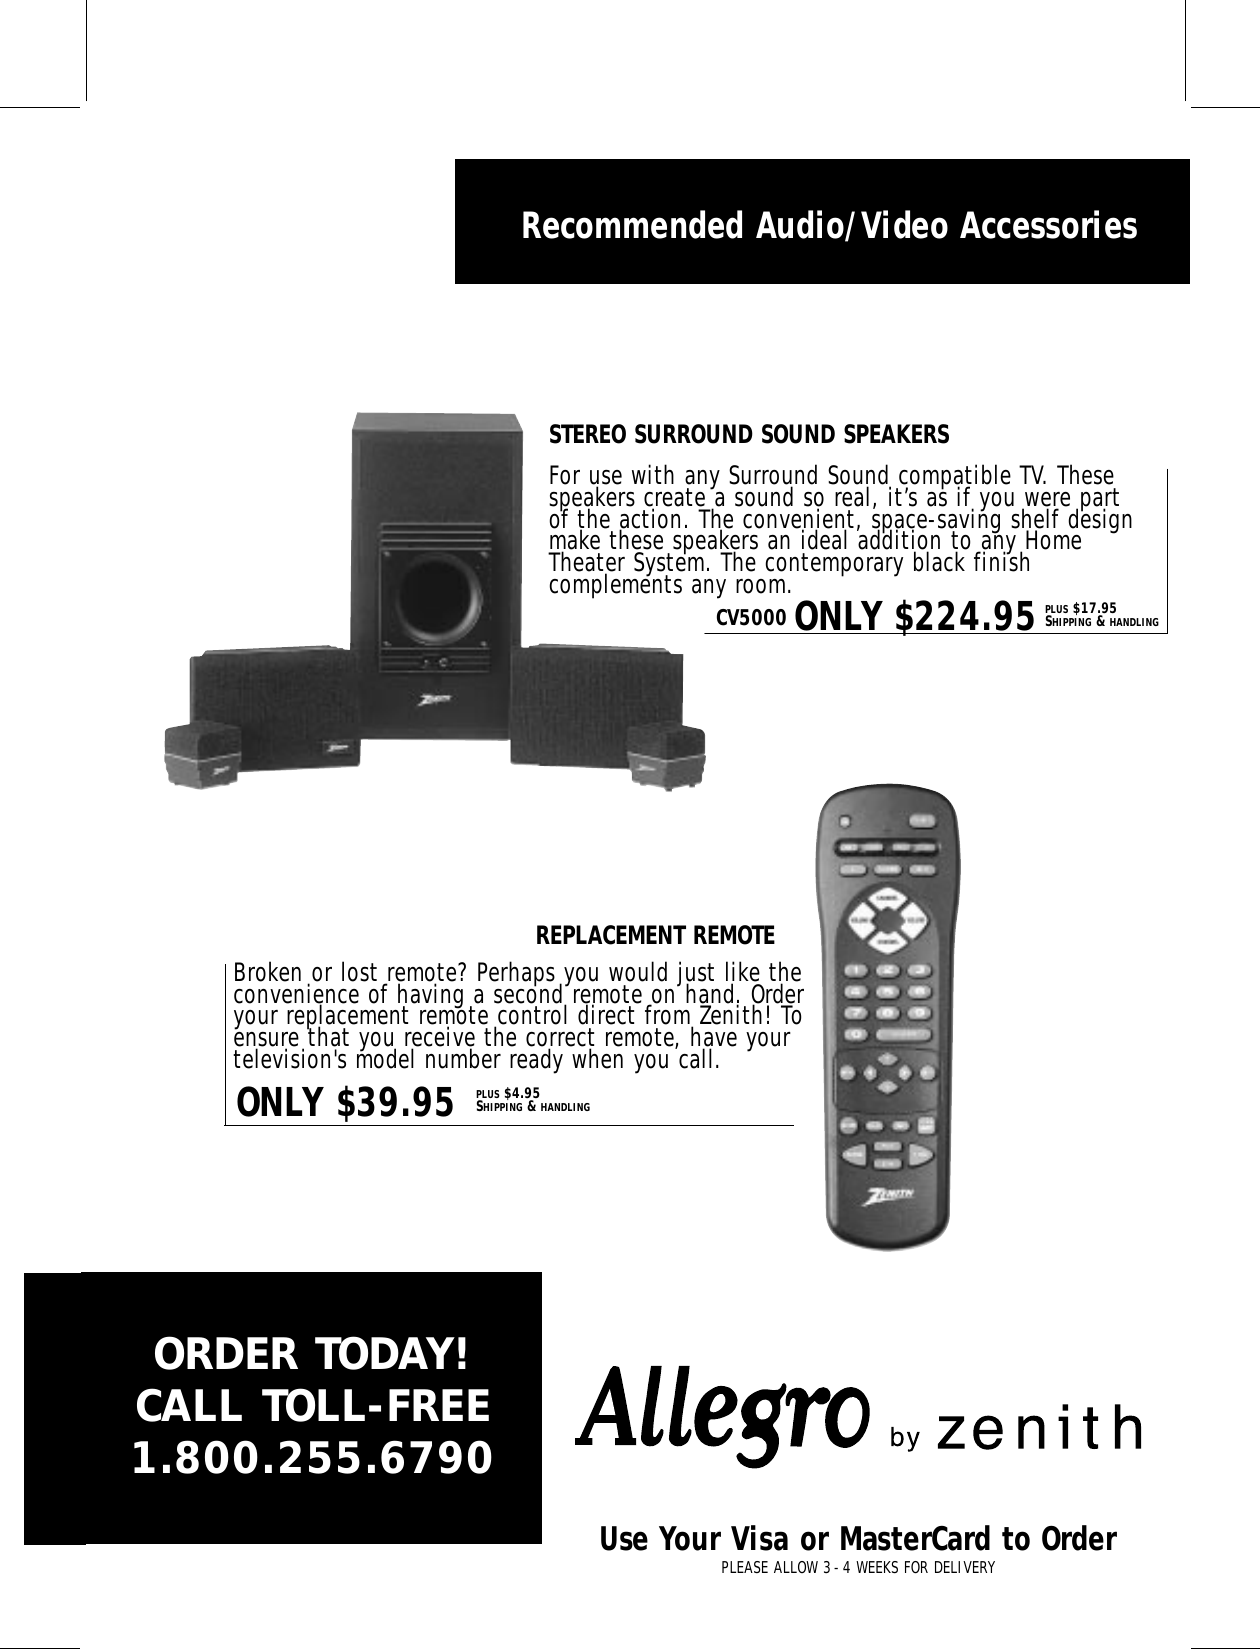 Recommended Audio/Video AccessoriesBroken or lost remote? Perhaps you would just like theconvenience of having a second remote on hand. Orderyour replacement remote control direct from Zenith! Toensure that you receive the correct remote, have yourtelevision&apos;s model number ready when you call. For use with any Surround Sound compatible TV. Thesespeakers create a sound so real, it’s as if you were partof the action. The convenient, space-saving shelf designmake these speakers an ideal addition to any HomeTheater System. The contemporary black finishcomplements any room.ONLY $39.95CV5000 ONLY $224.95PLUS $4.95SHIPPING &amp; HANDLINGPLUS $17.95SHIPPING &amp; HANDLINGSTEREO SURROUND SOUND SPEAKERSREPLACEMENT REMOTEORDER TODAY!CALL TOLL-FREE1.800.255.6790Use Your Visa or MasterCard to OrderPLEASE ALLOW 3-4 WEEKS FOR DELIVERYzenith